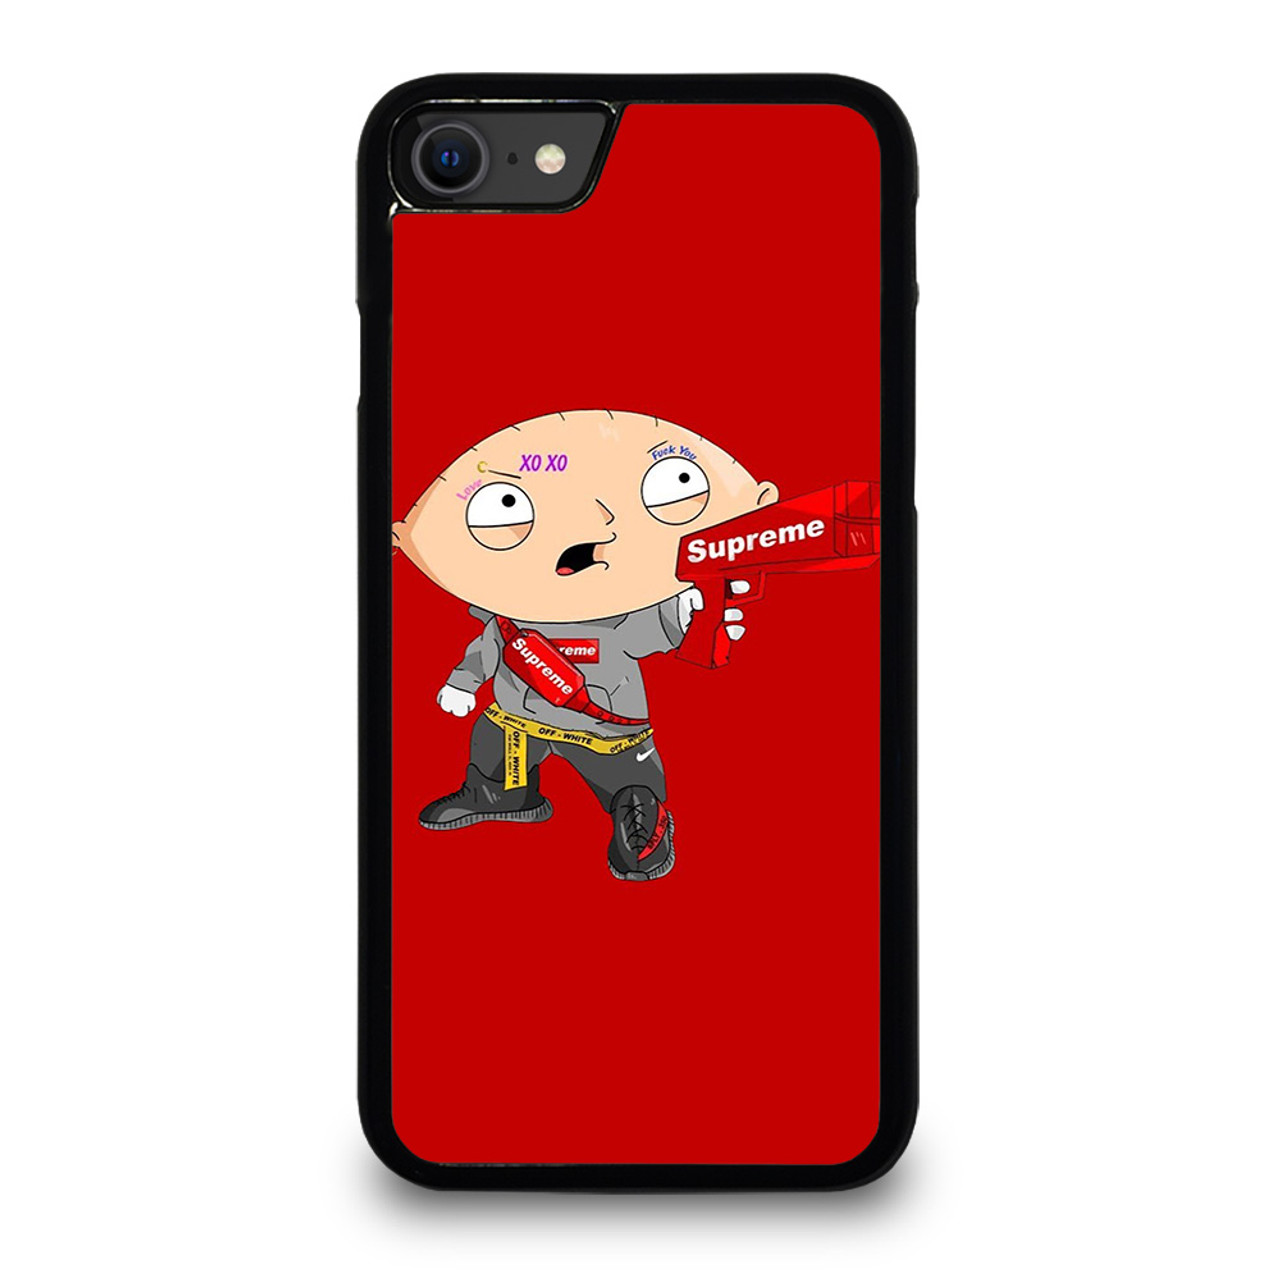 SUPREME GRIFFIN FAMILY GUY 2 iPhone SE 2020 Case Cover